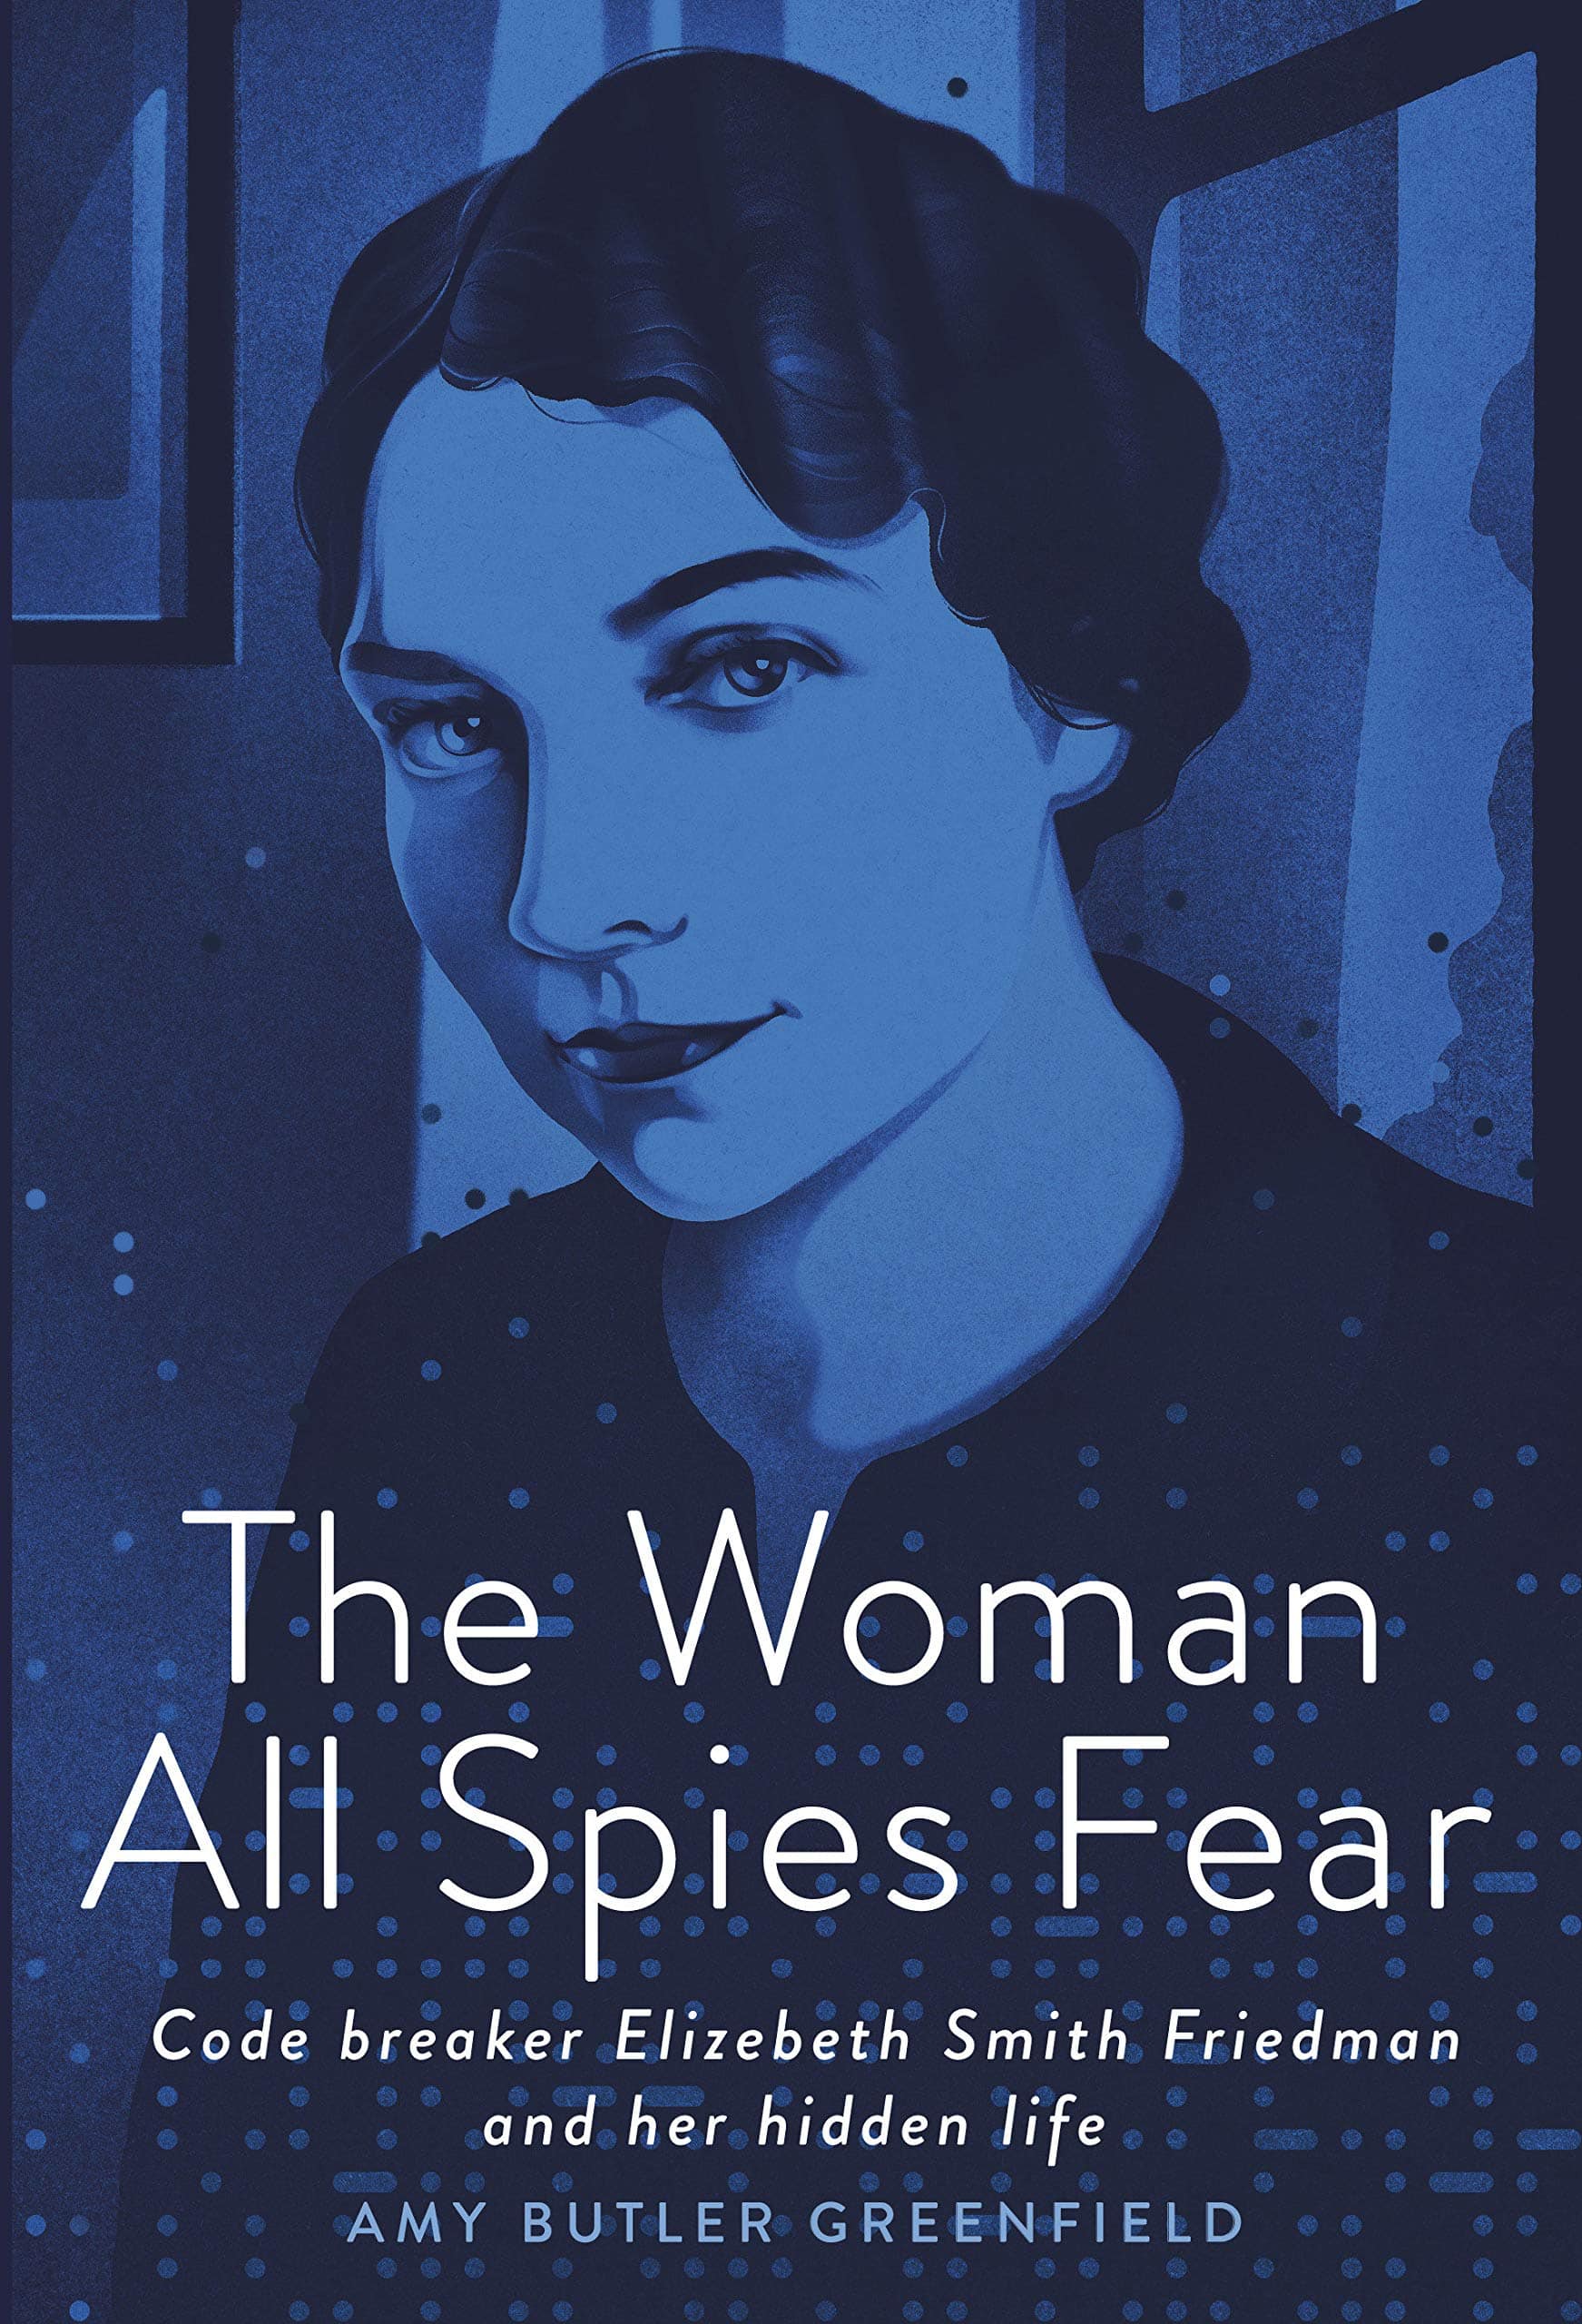 The Woman All Spies Fear Book Review